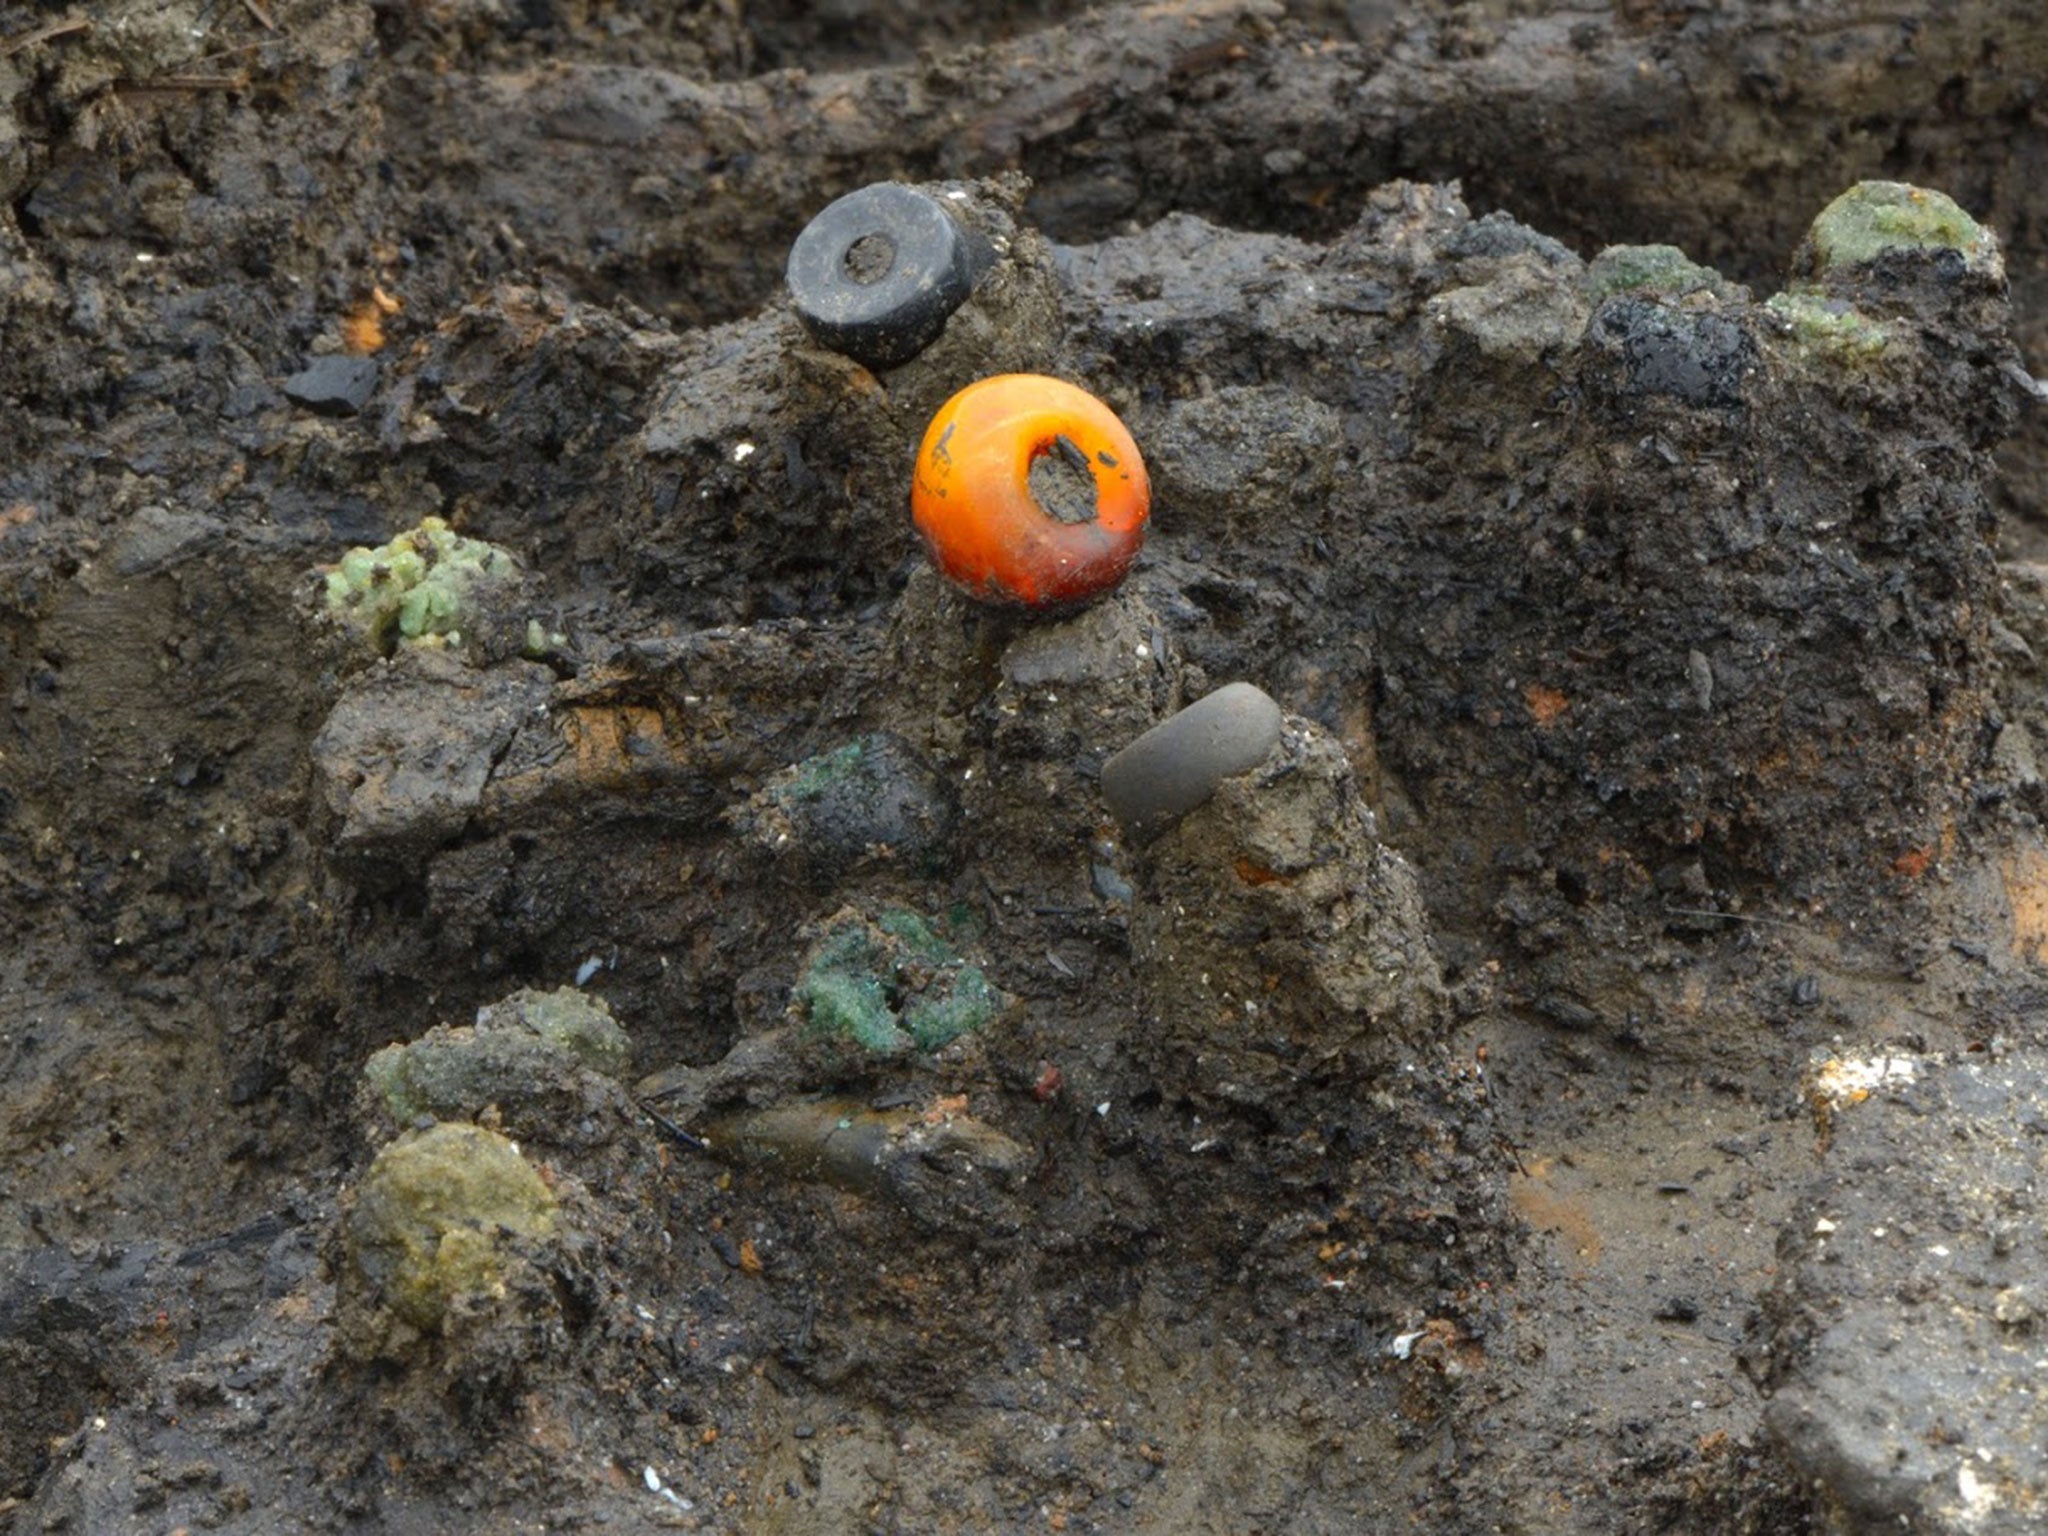 Amber bead and others found in situ